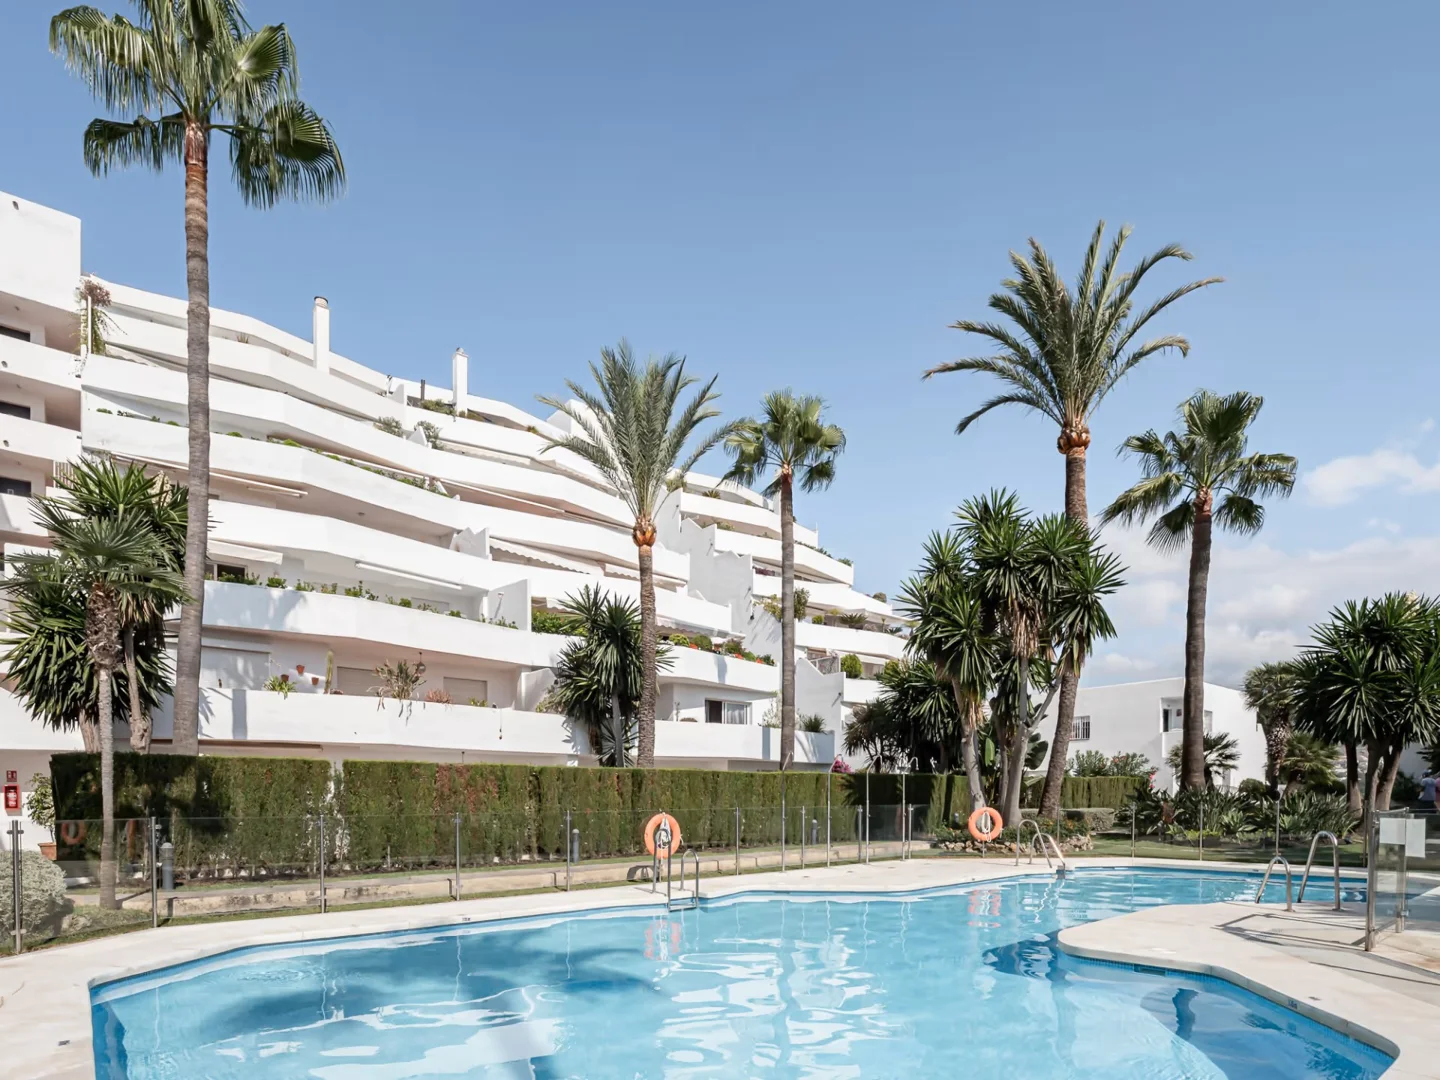 Gorgeous 4-bedroom apartment in a prime area of Puerto Banus.